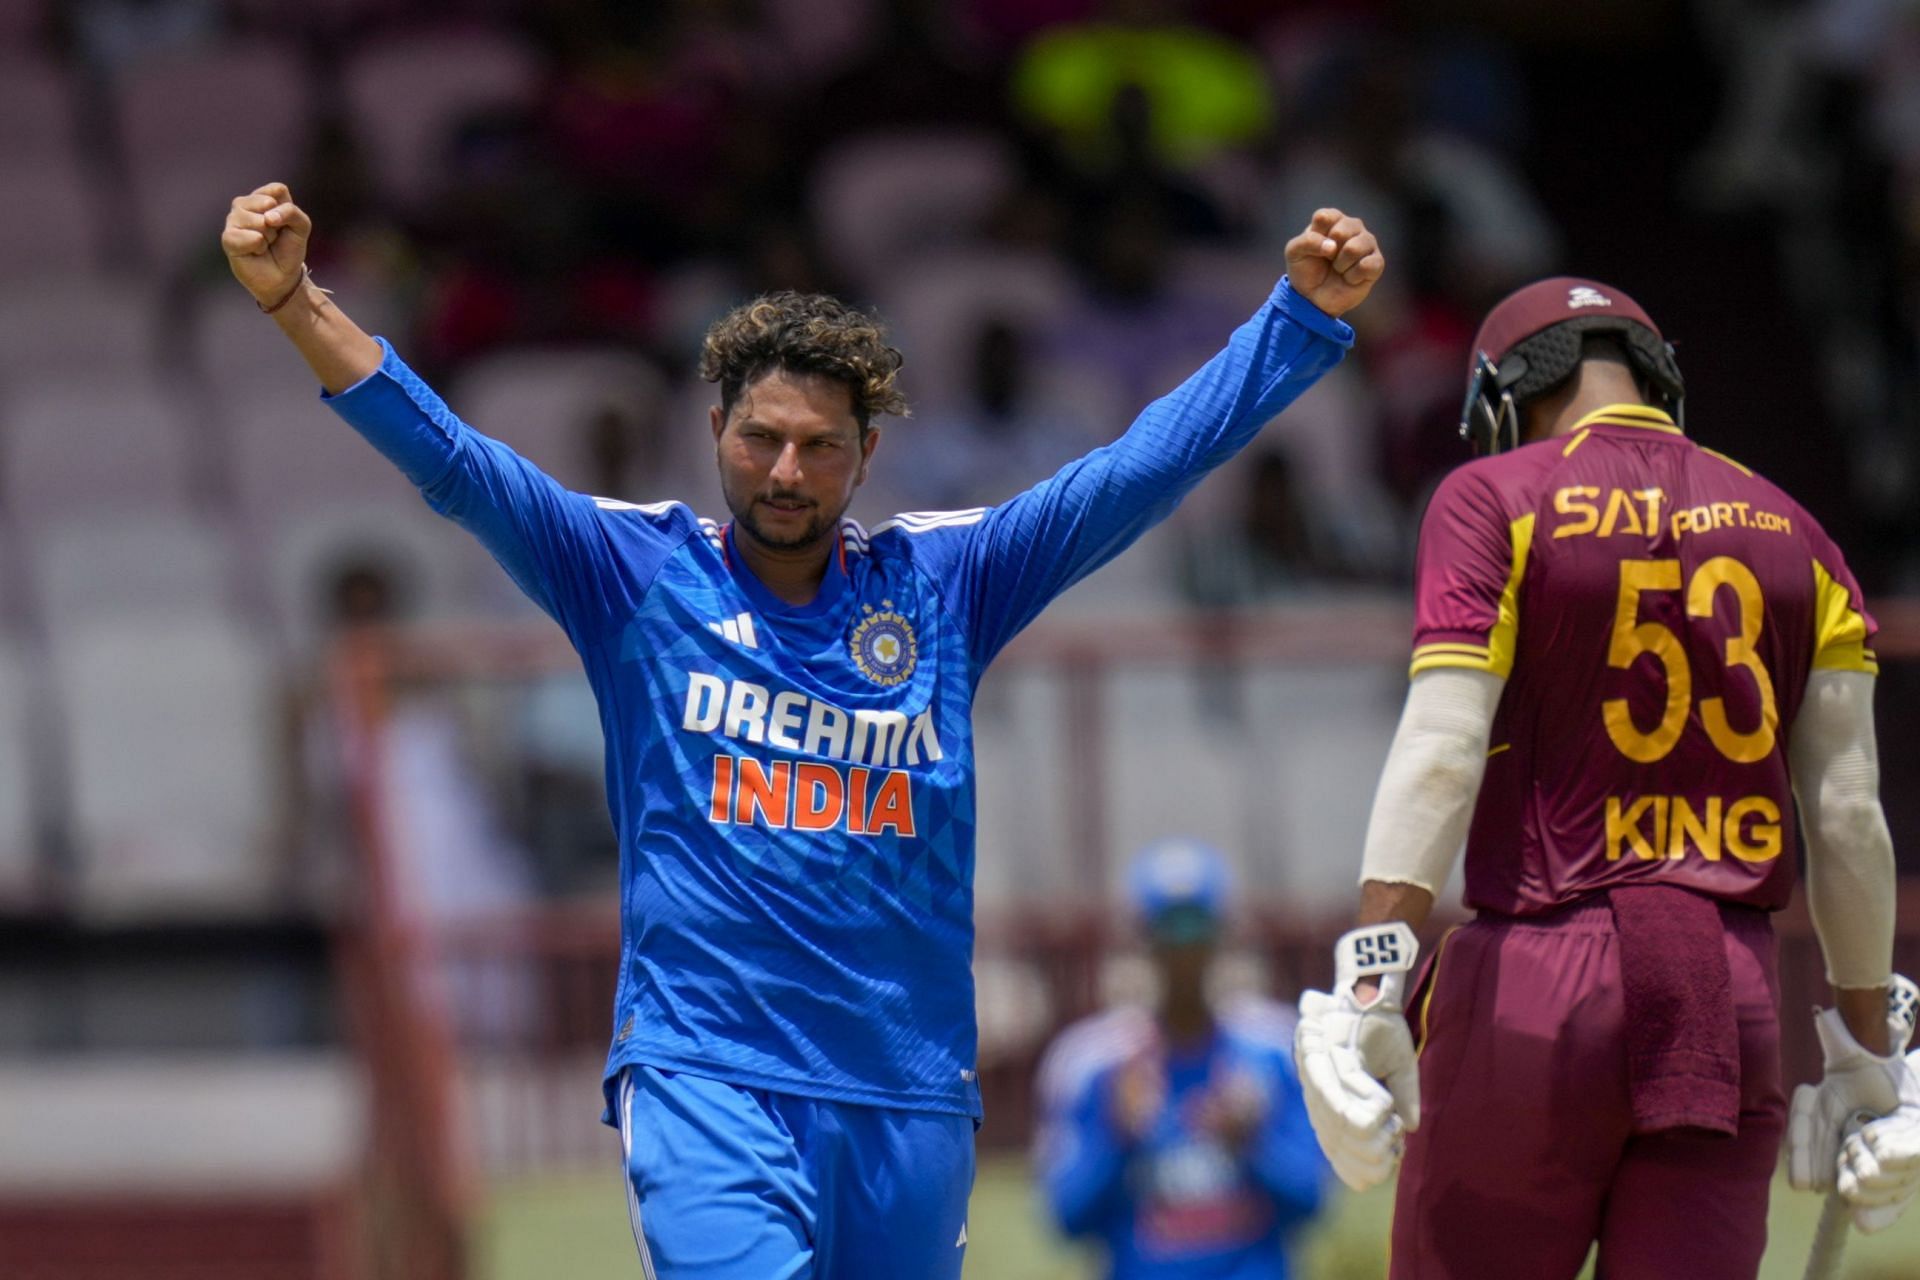 Kuldeep Yadav will lead the Men in Blue&#039;s spin attack in the World Cup